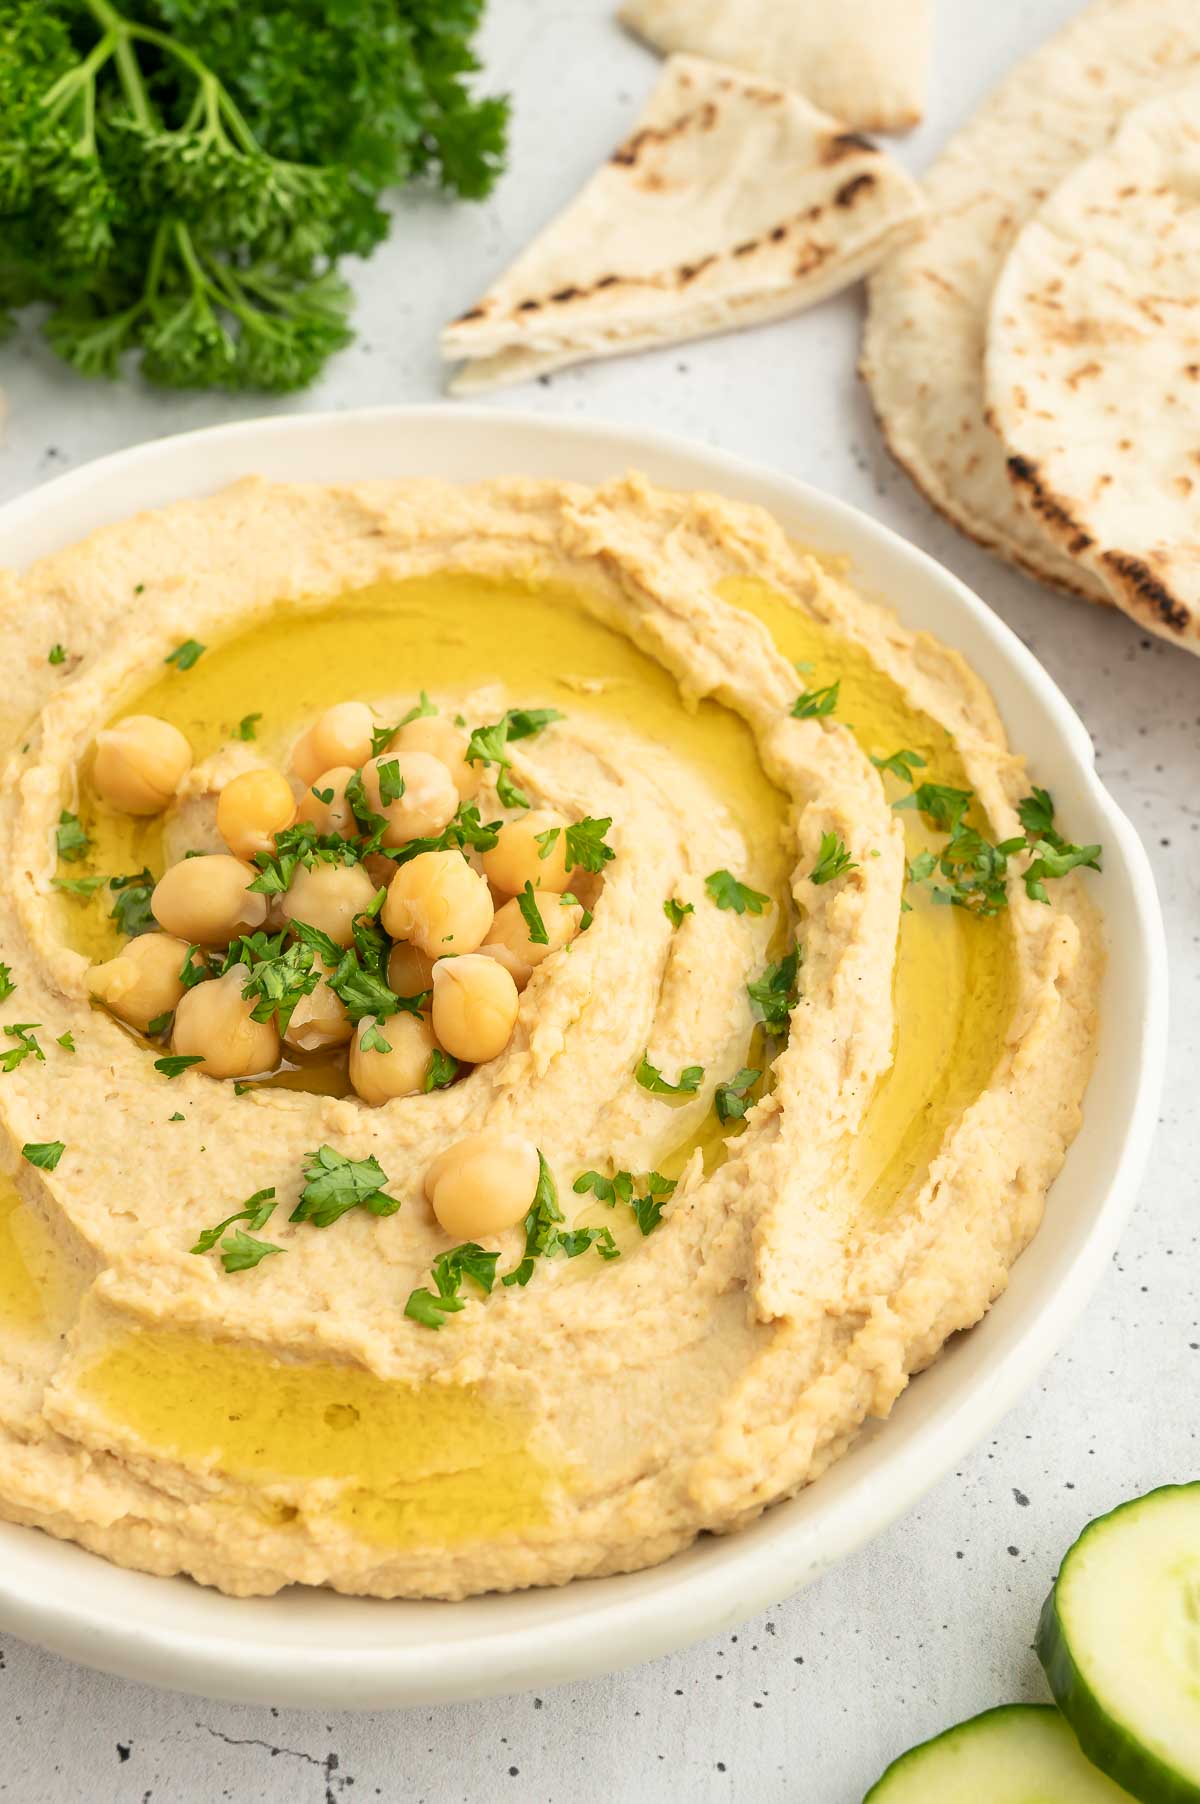 A bowl of hummus garnished with chickpeas.